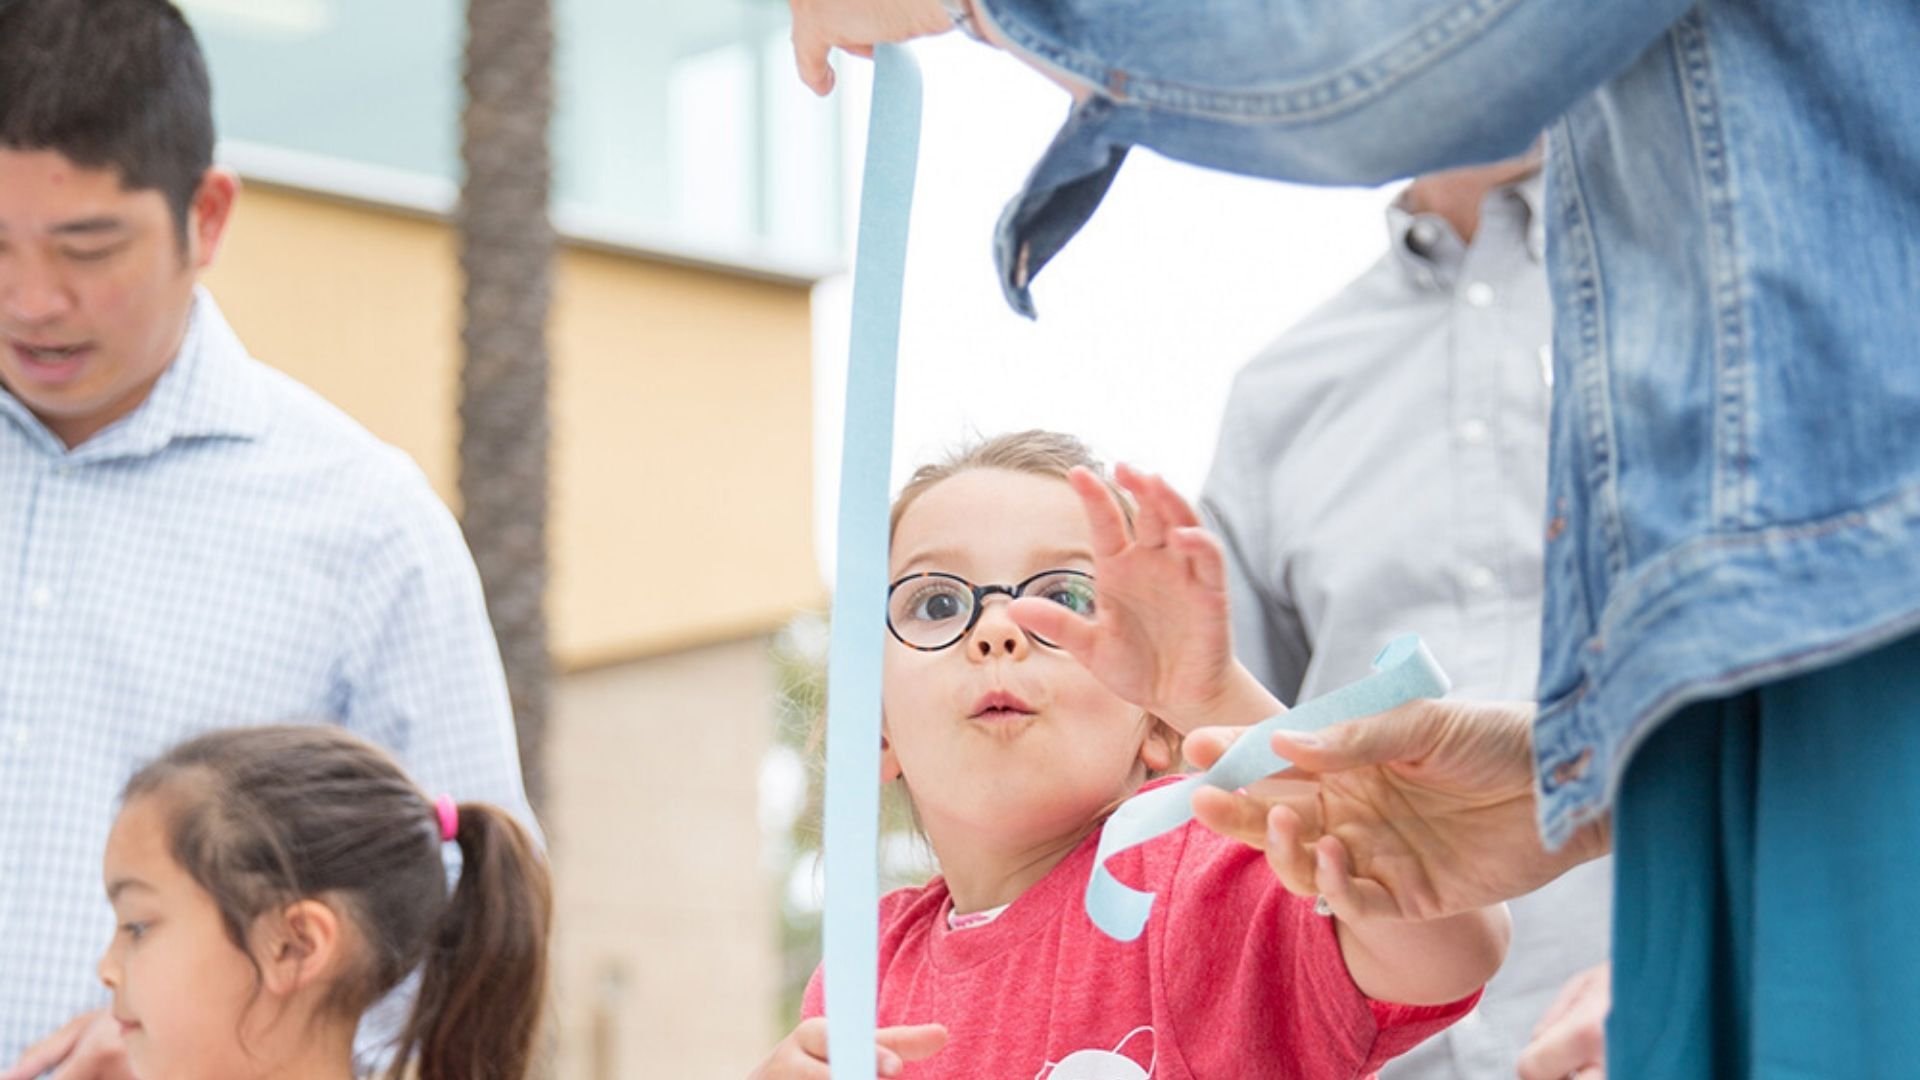 A child participates in an ASML STEM-related event in San Diego, California